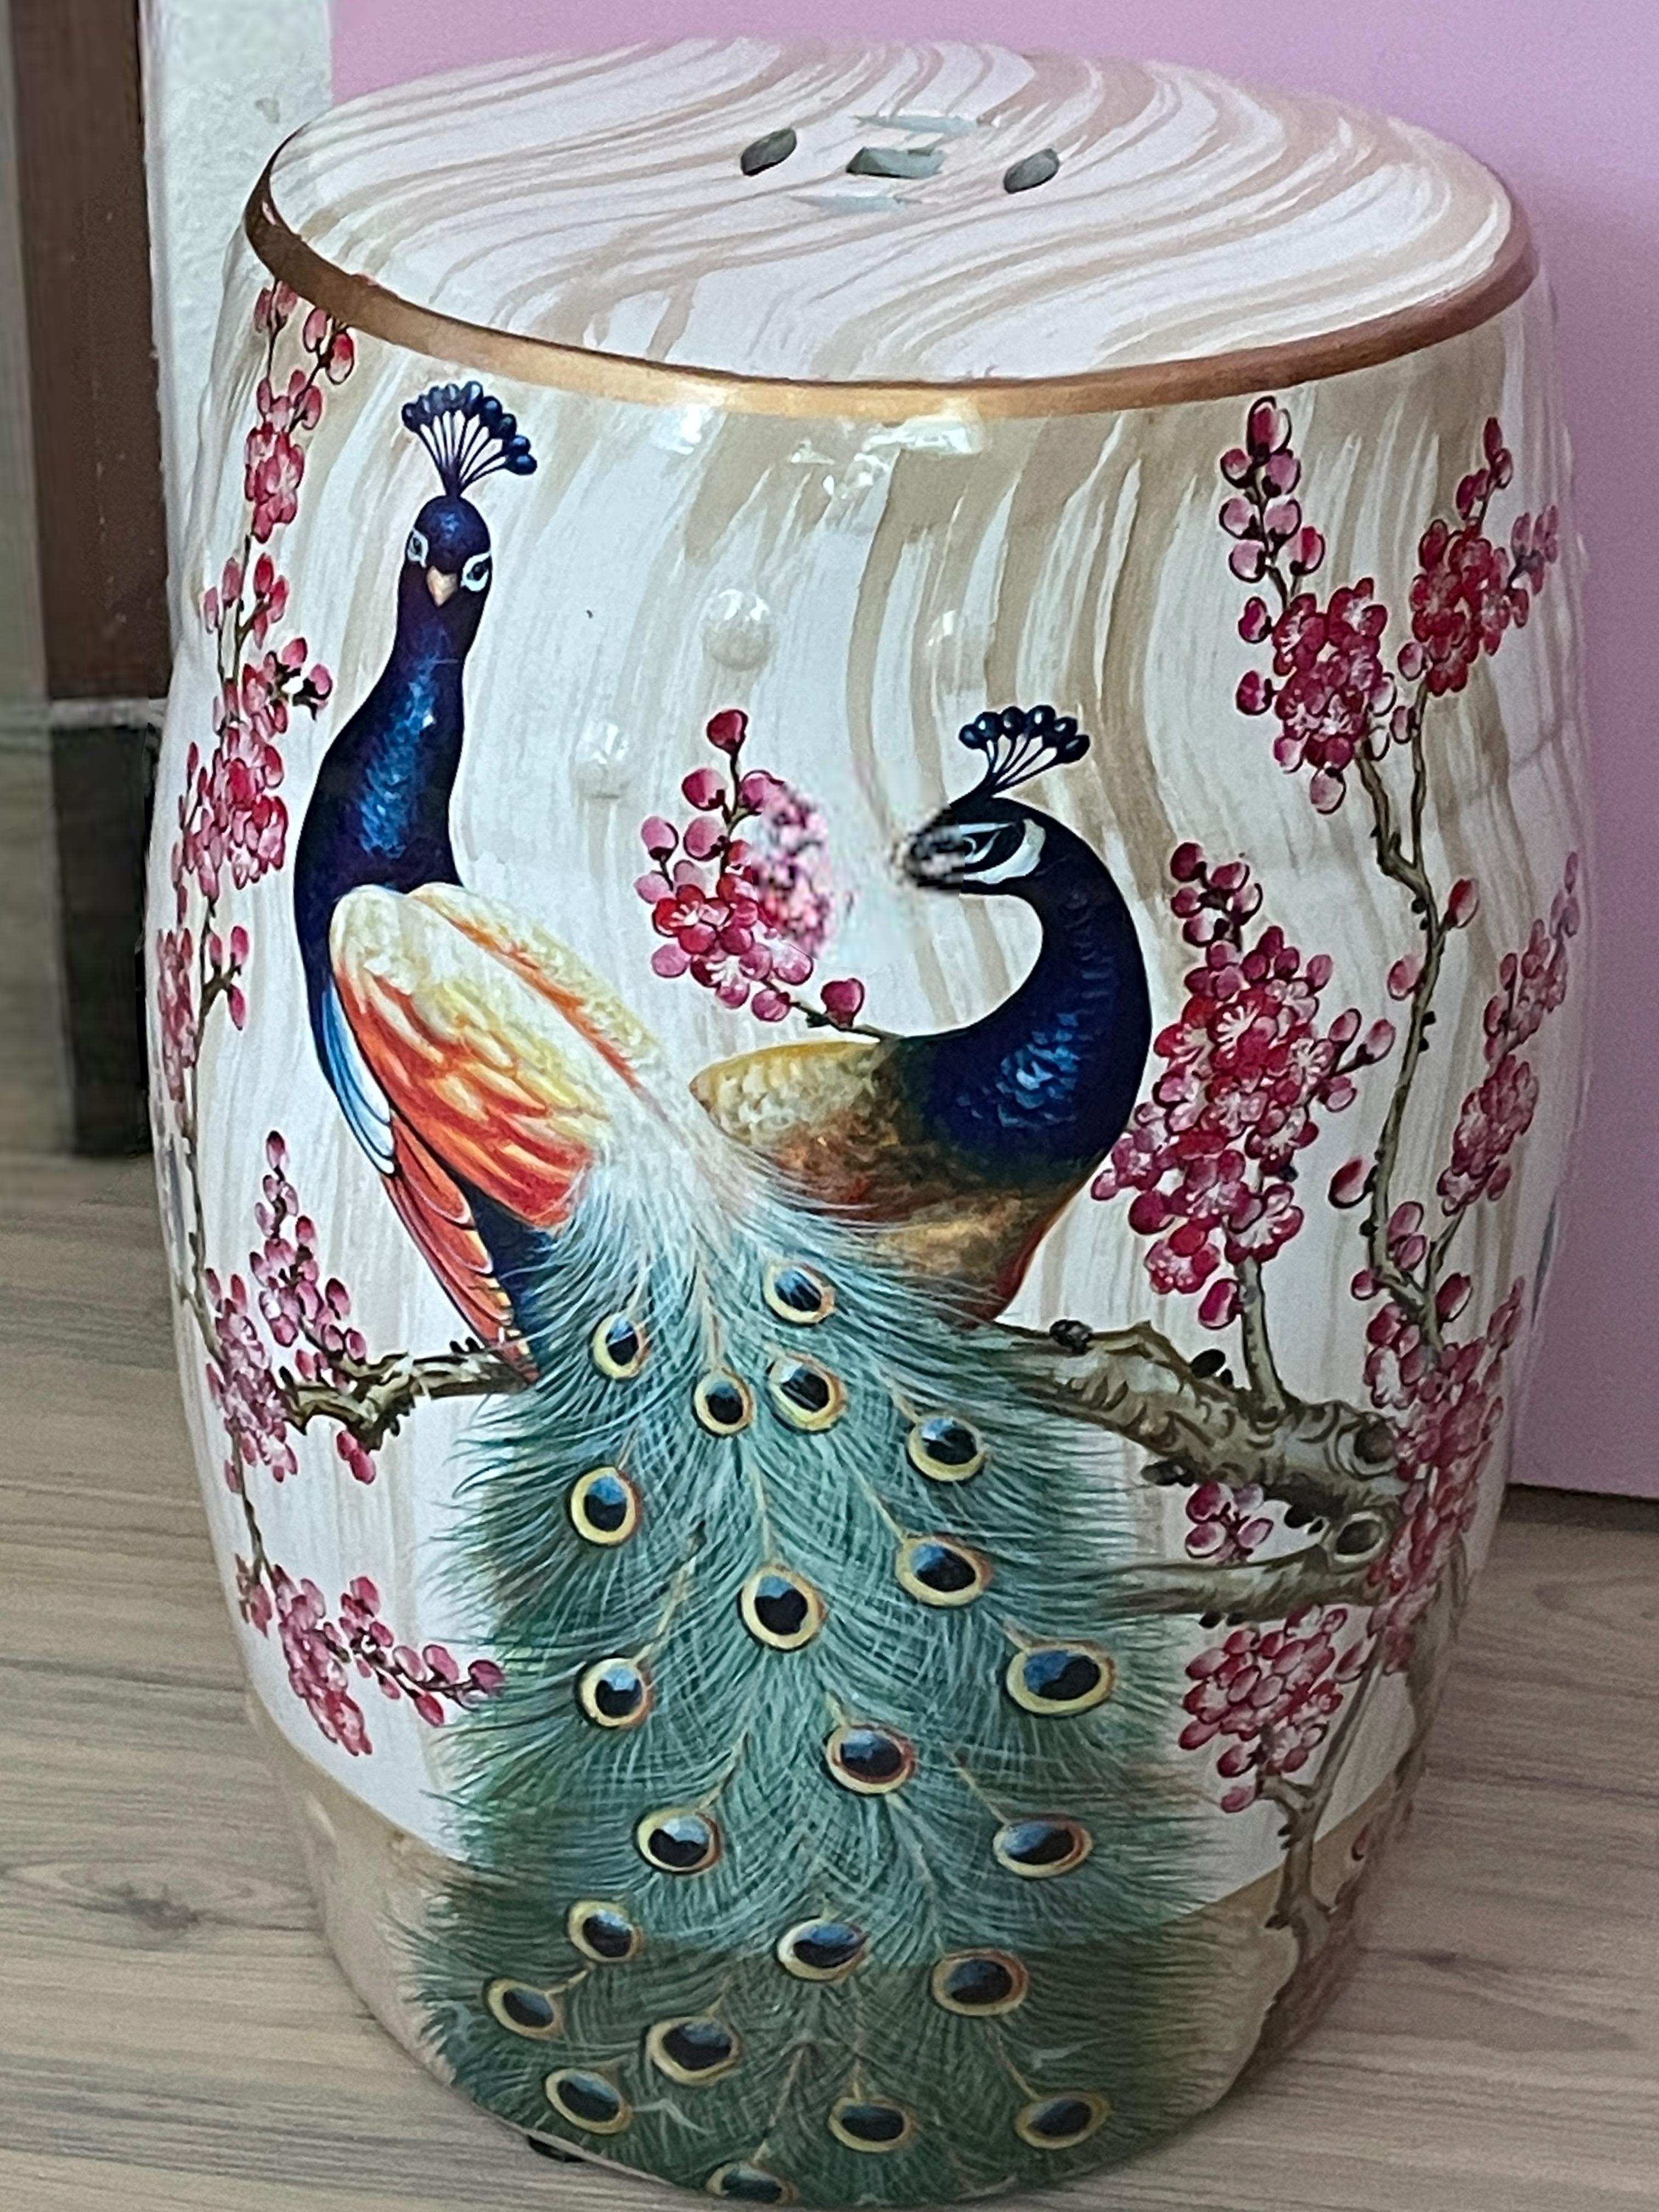 Mid-20th century Chinese export hand painted porcelain yellow and faux bamboo style garden stool or flower pot seat. This lovely piece has a flower and peacock motif on two sides. Features raised dot detail and Chinese geometric cut-out symbols on